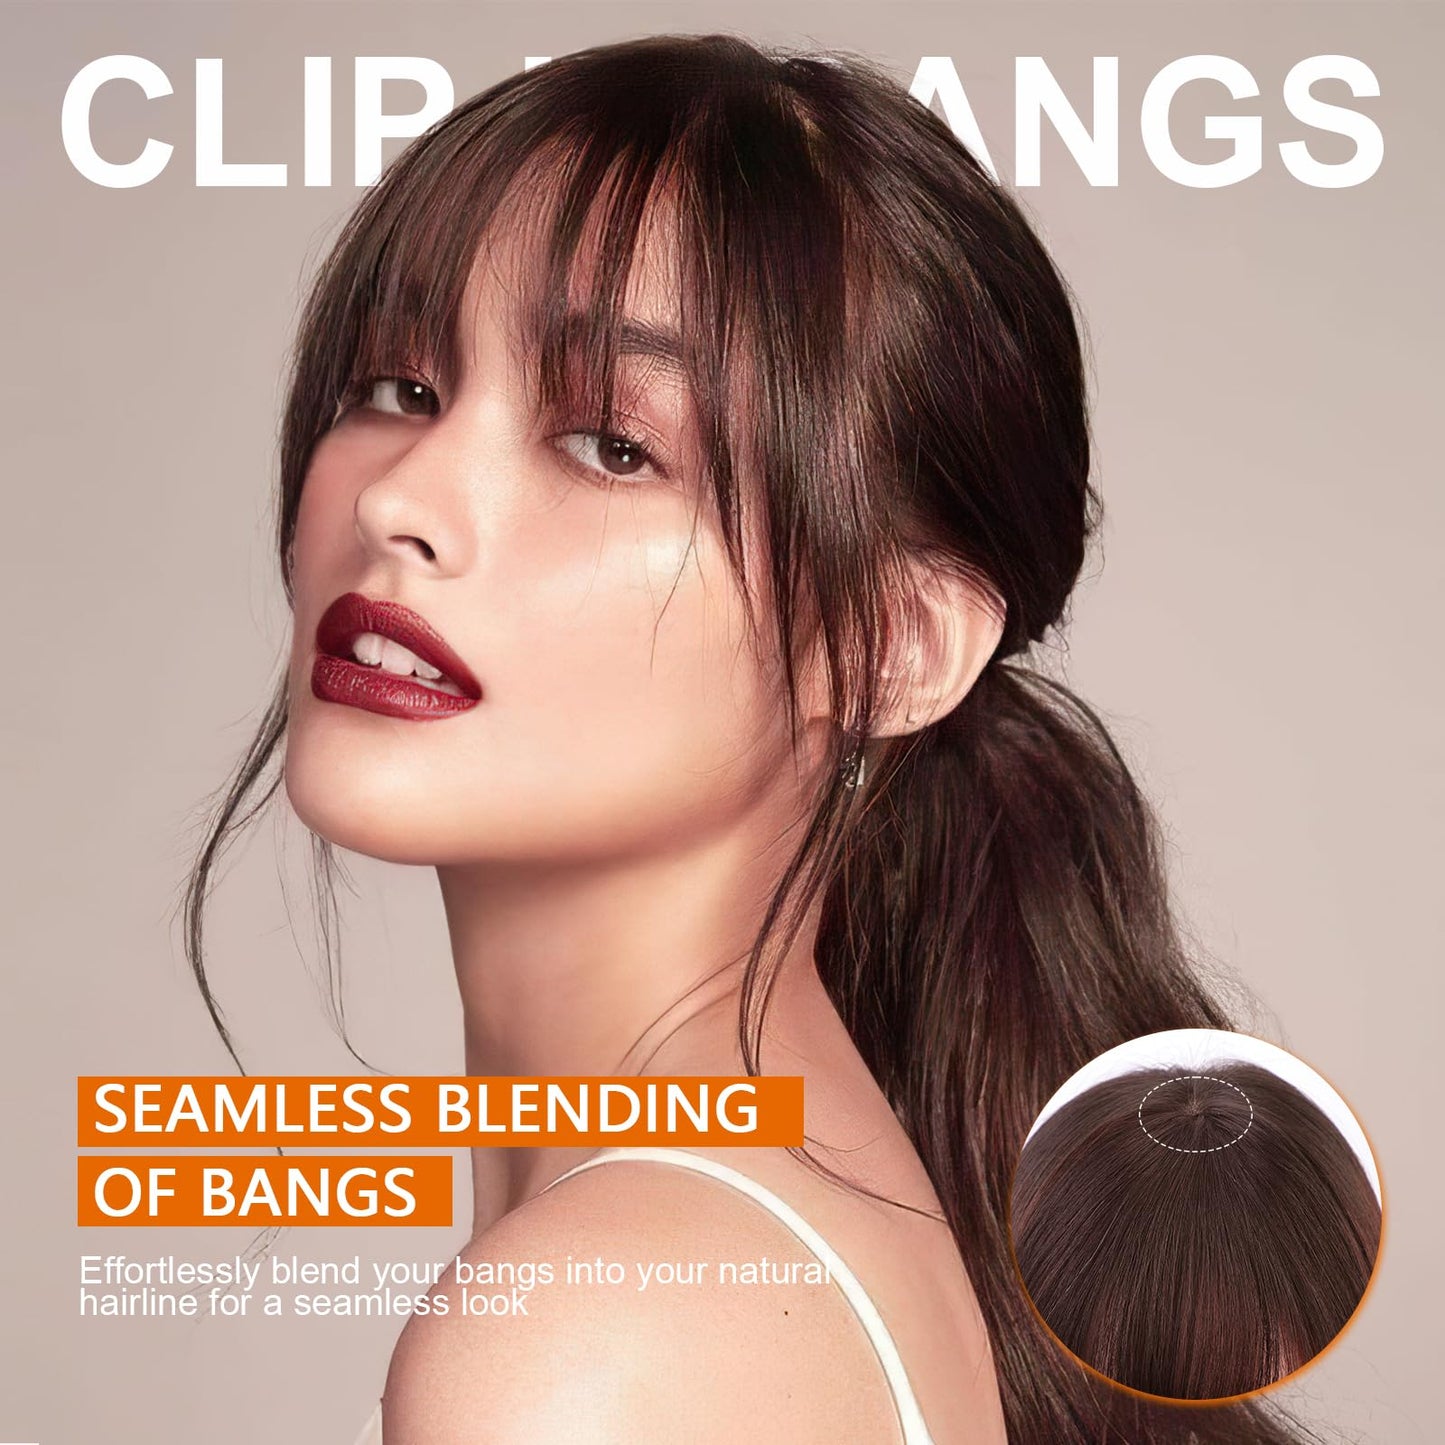 QGZ Clip in Bangs-Fake Bangs Hair Clip Fringe with Temples Hairpieces 100% Real Human Hair Extensions Curved Clip On Bangs for Women(Dark Auburn Brown Air Bangs)